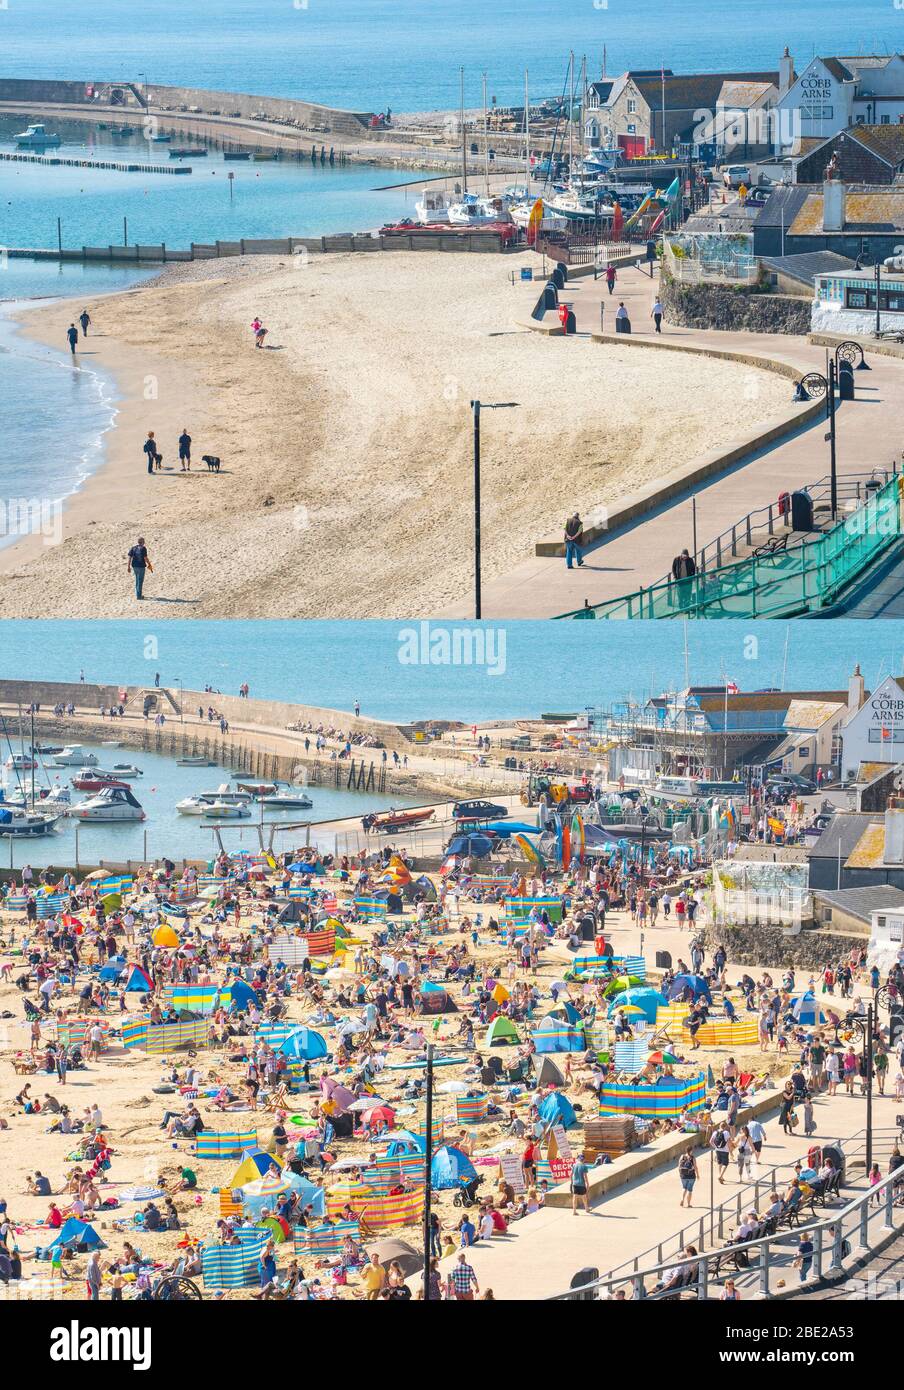 Lyme Regis, Dorset, UK. 11th Apr, 2020. UK Weather: Lyme Regis, Dorset, UK. View of Lyme Regis on a gloriously sunny Easter Saturday 2019 and a similarly beautiful Easter Saturday 2020. The COVID-19 pandemic restrictions are hitting the tourist industry hard in the town and across the South West as visitors and tourists follow Government insturctions to 'stay at home, protect the NHS, and save lives' during coronavirus outbreak. Credit: Celia McMahon/Alamy Live News Stock Photo